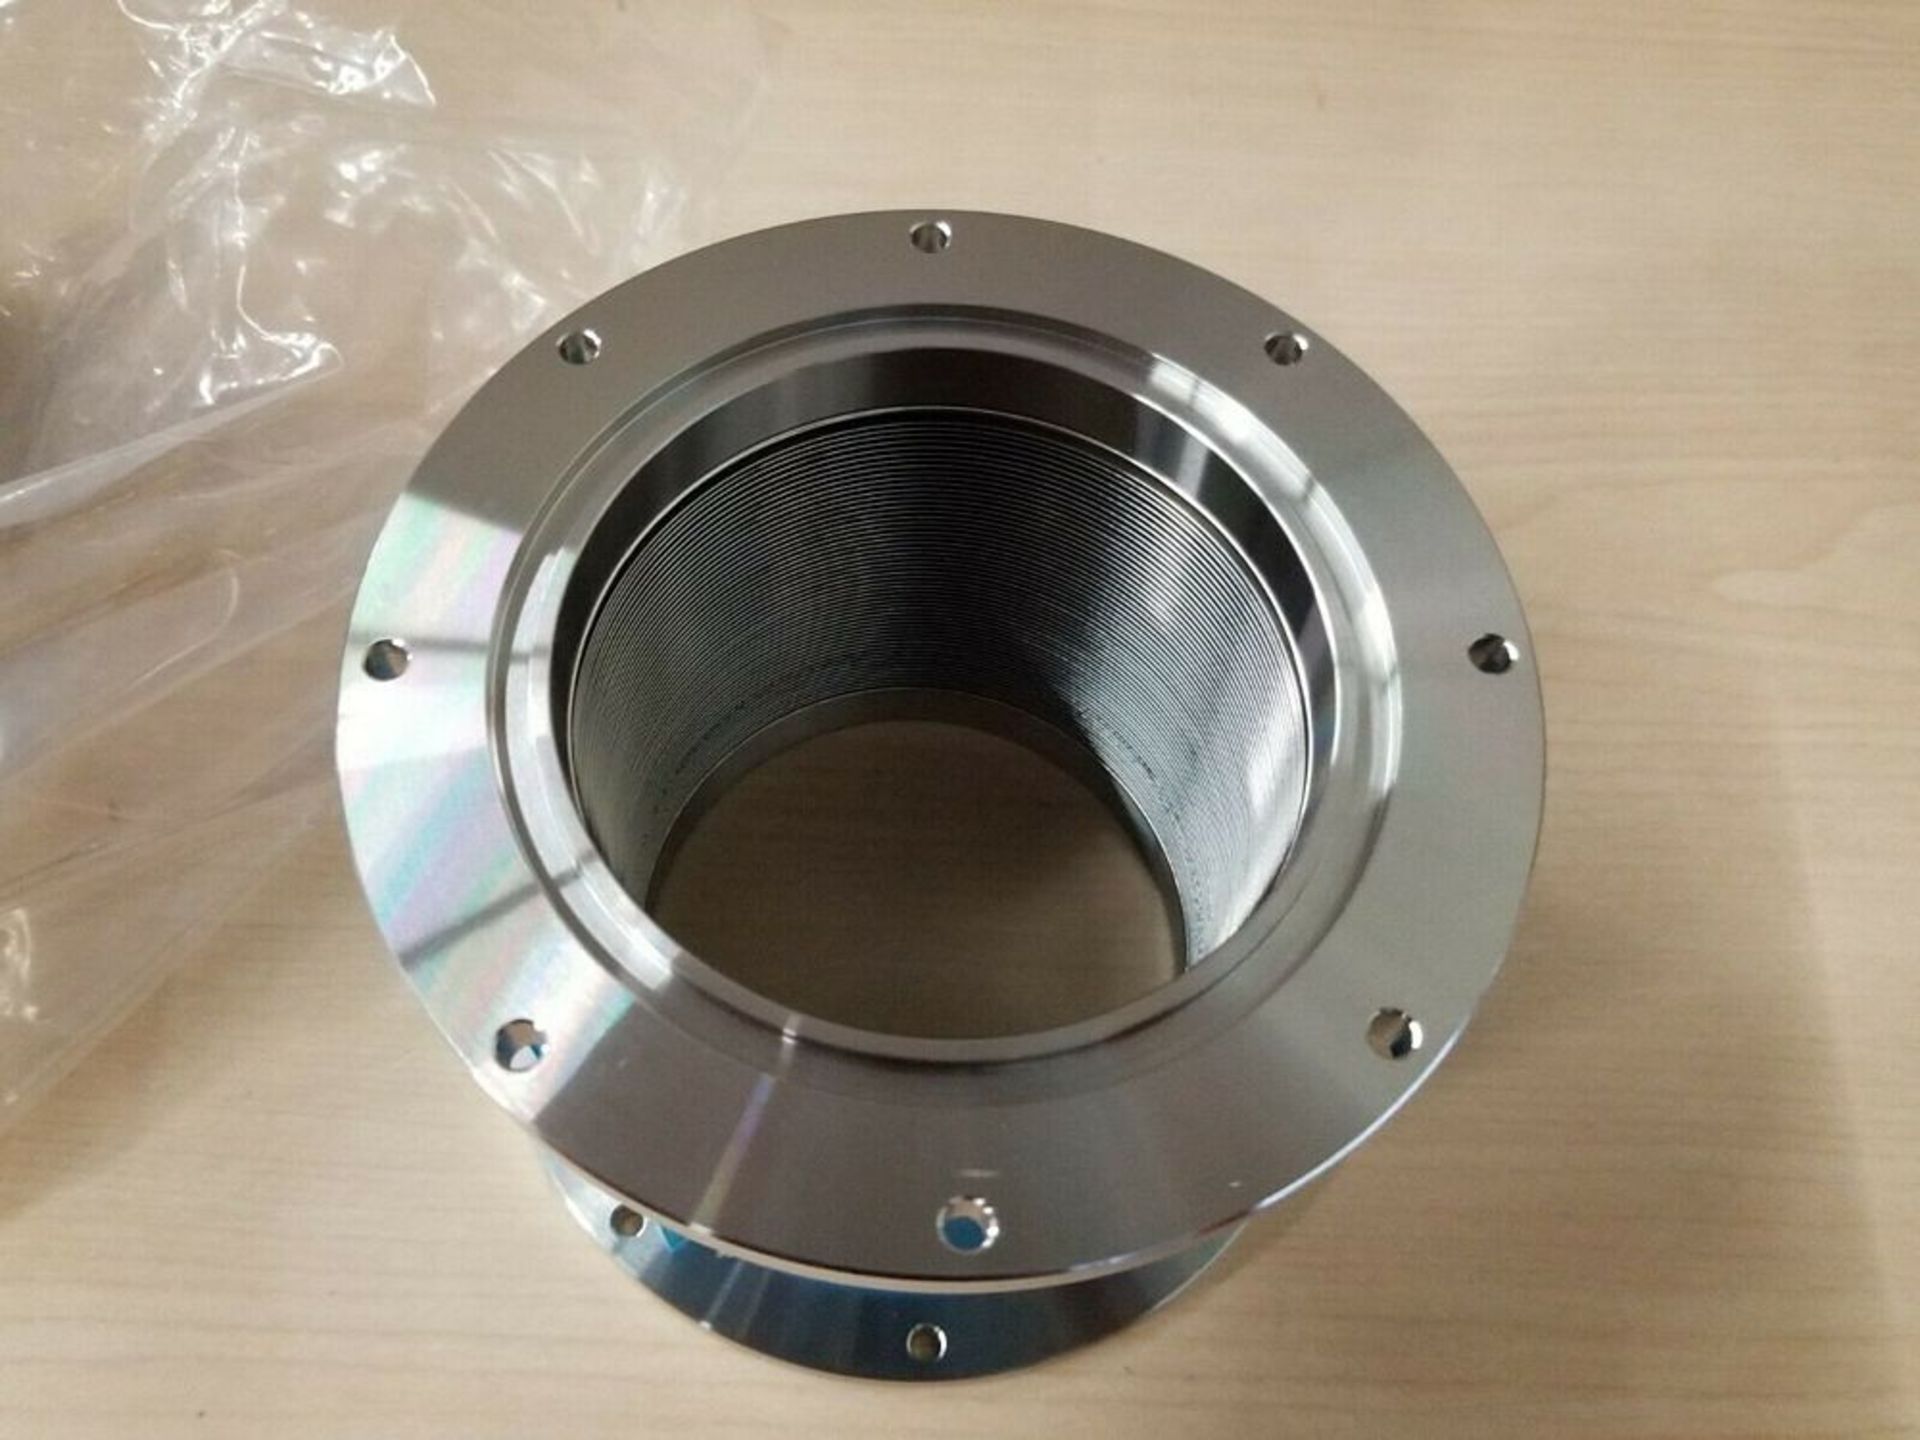 NEW EAGLE STAINLESS STEEL VACUUM BELLOWS FLANGE - Image 5 of 8